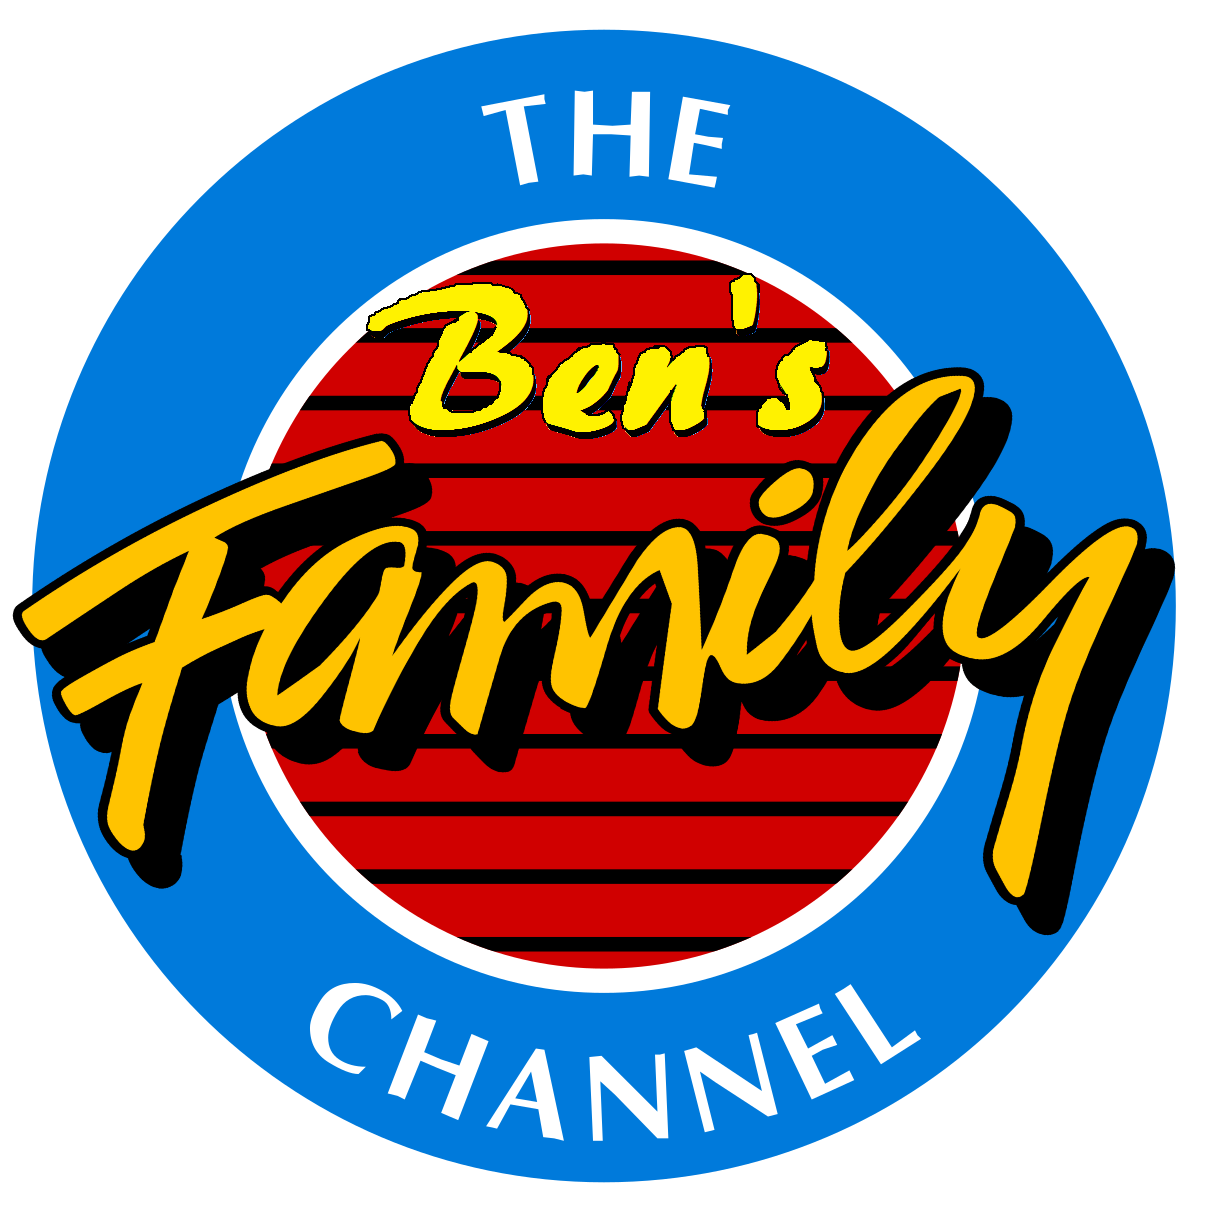 Image - TheBen'sFamilyChannel.png | Dream Logos Wiki | FANDOM powered ...